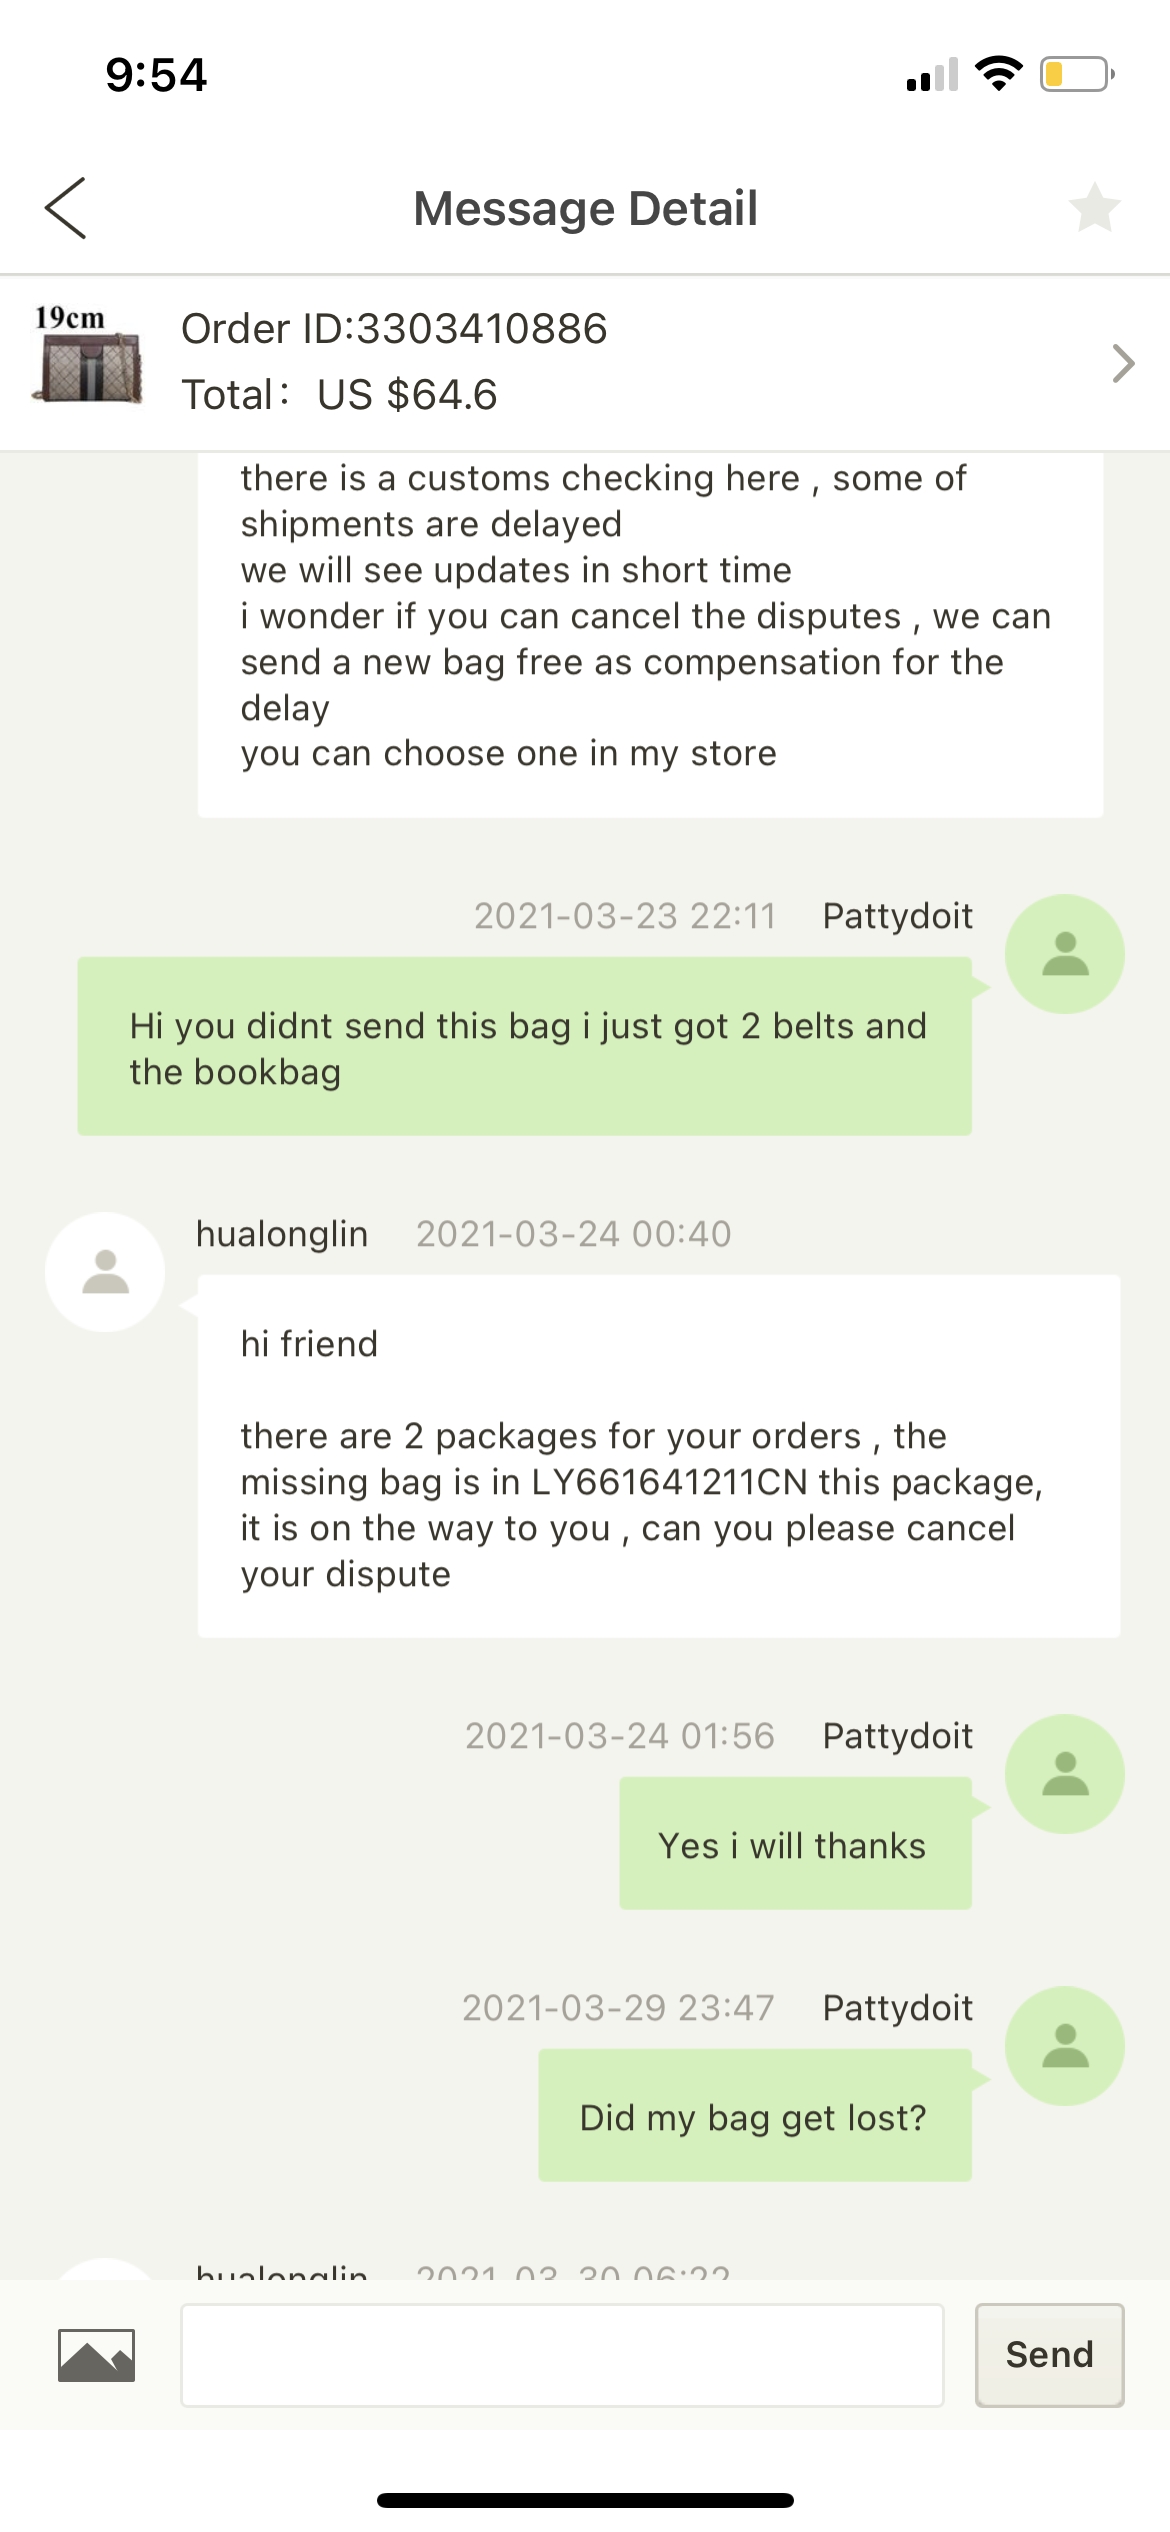 DHgate.com complaint Didn’t get my purchase